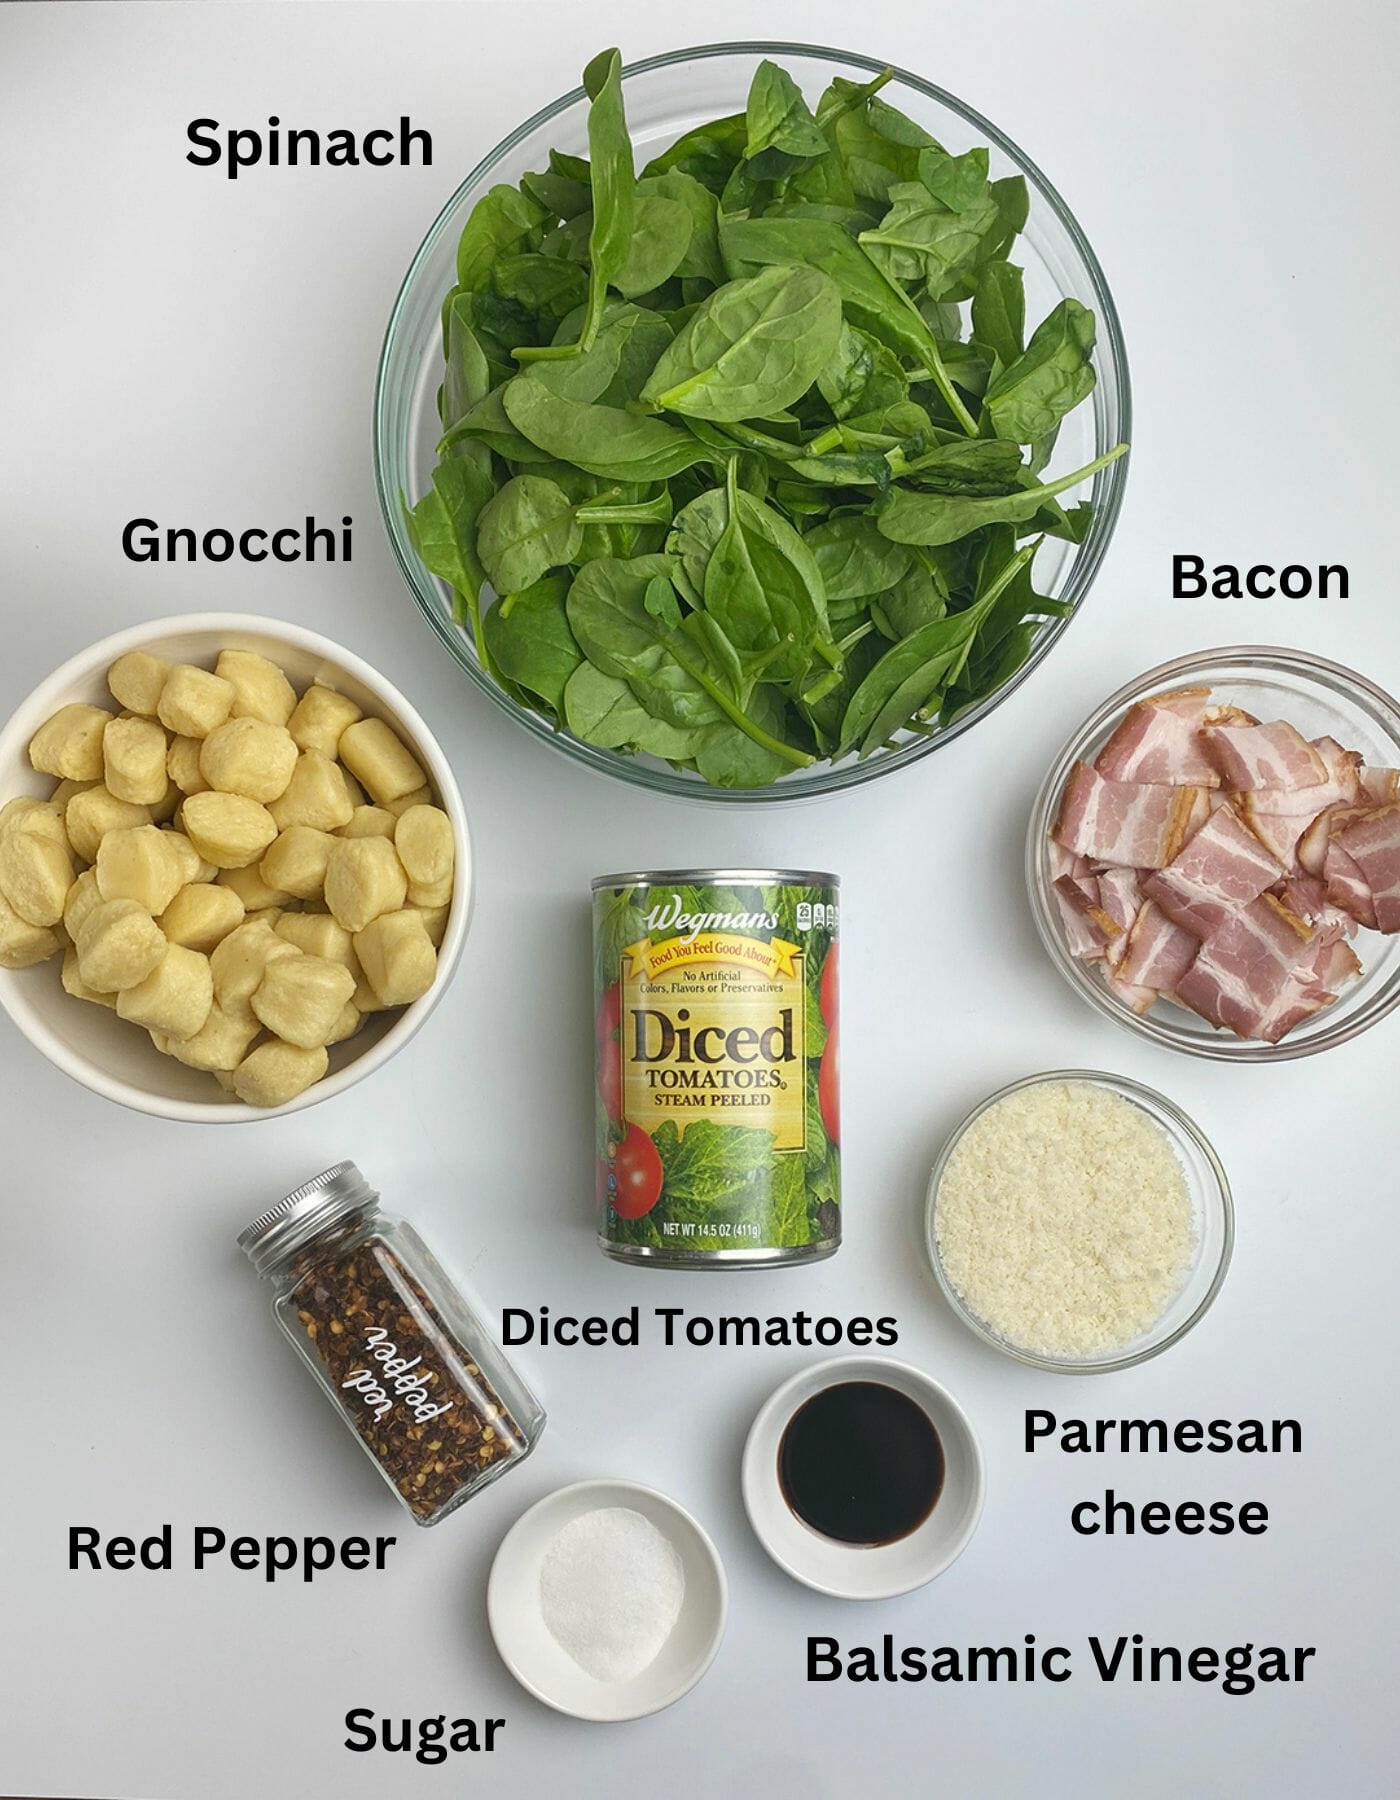 Gnocchi with bacon and spinach ingredients on a white counter.